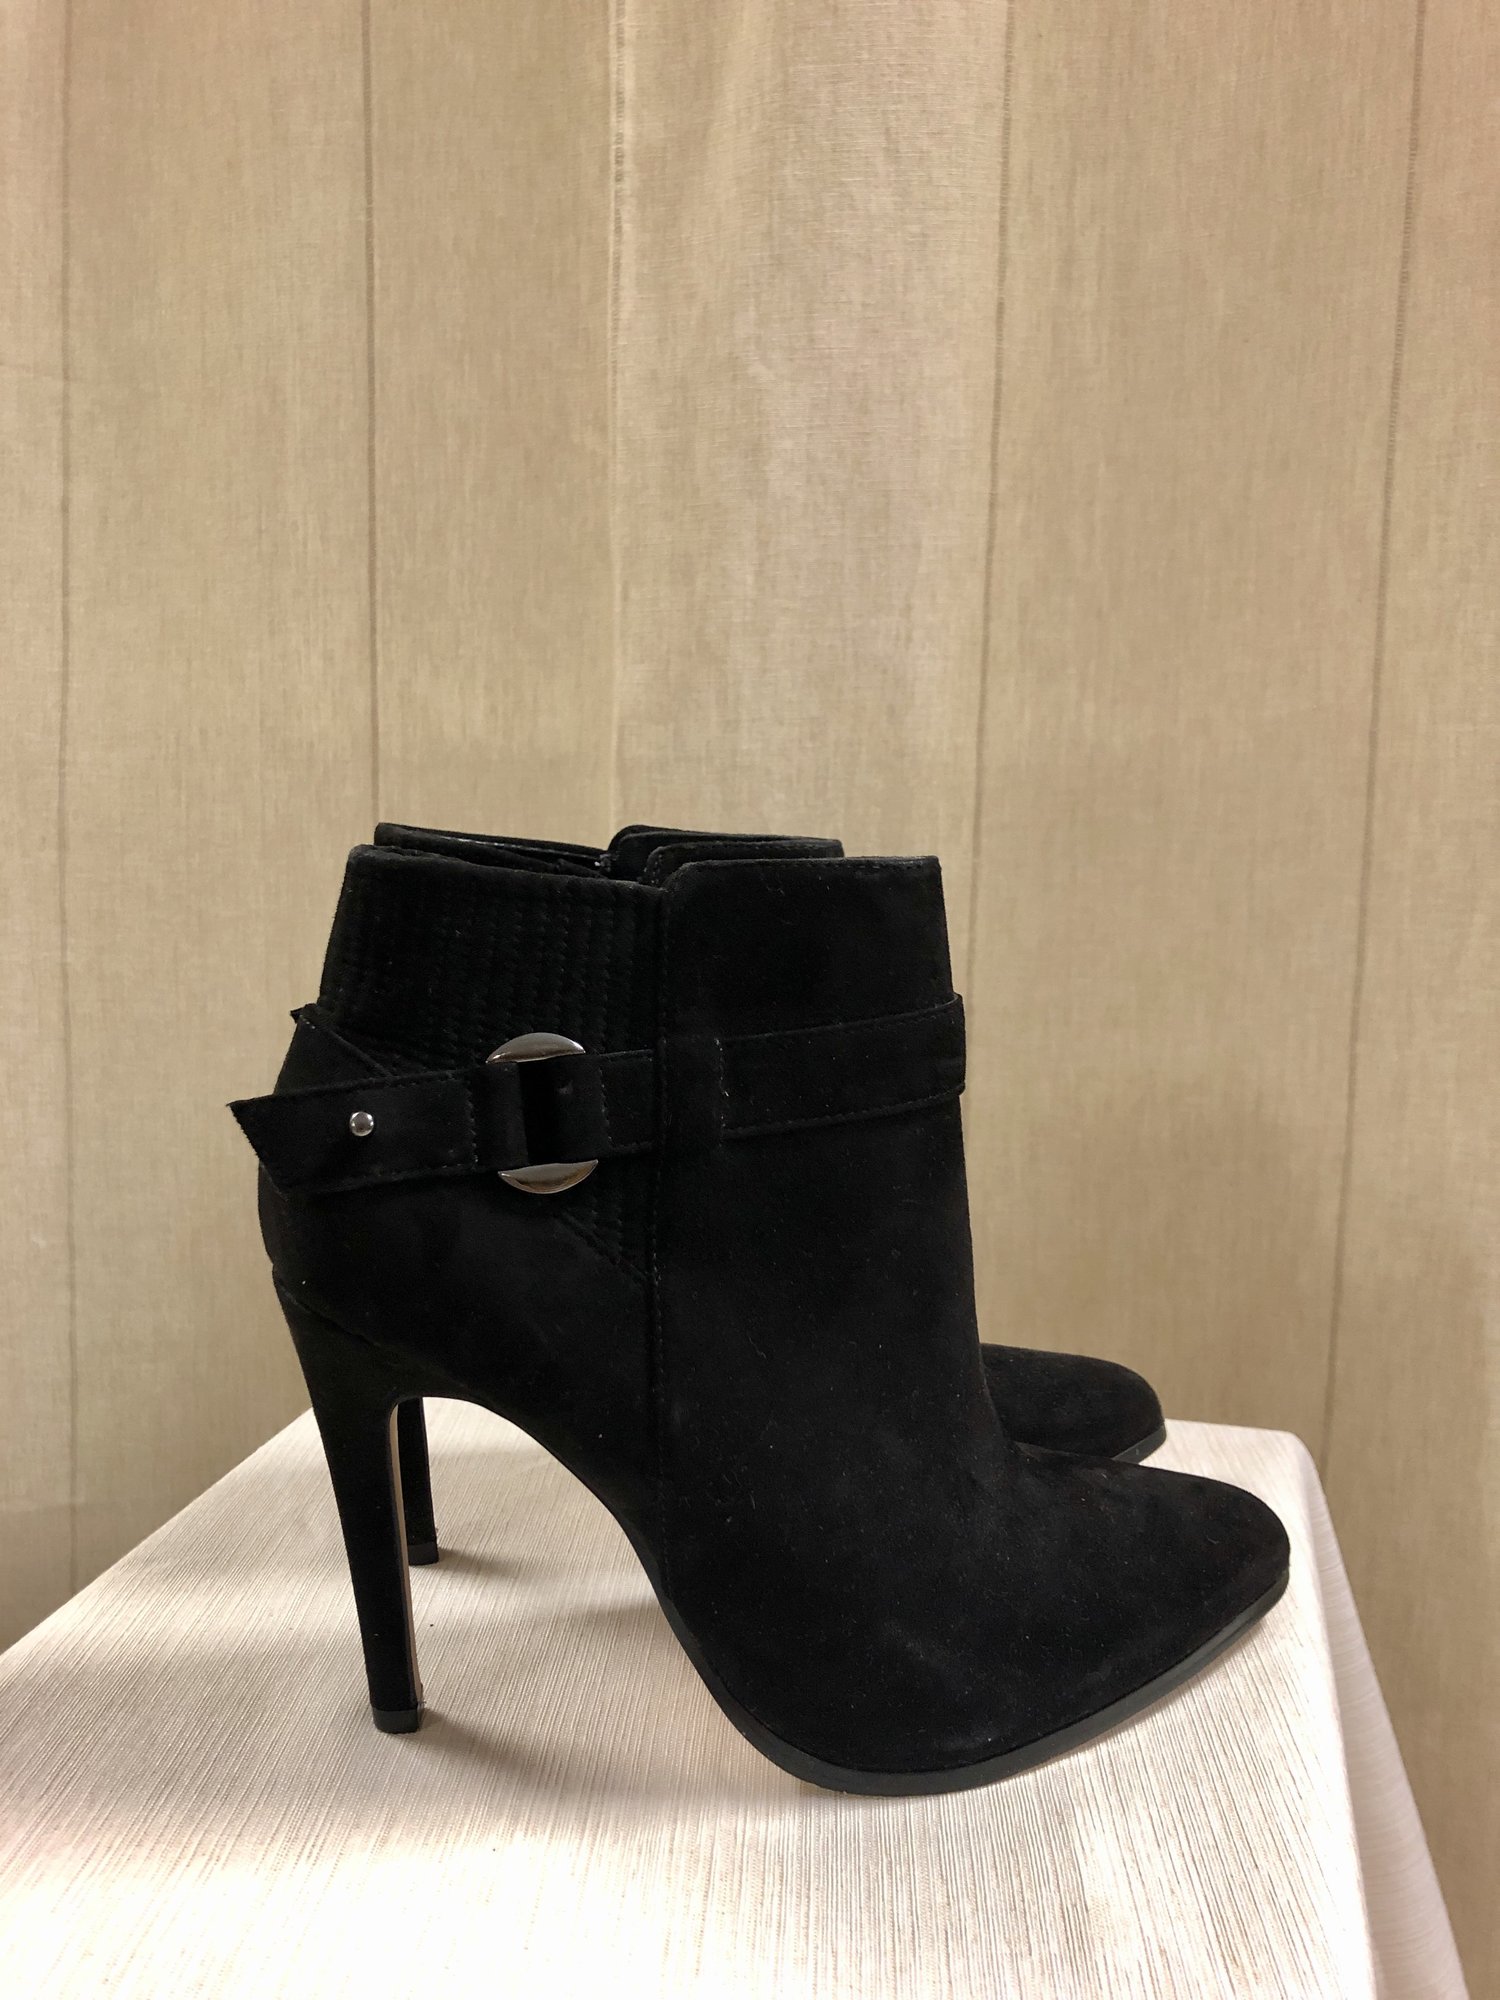 FOREVER 21 Booties - Stitched Up